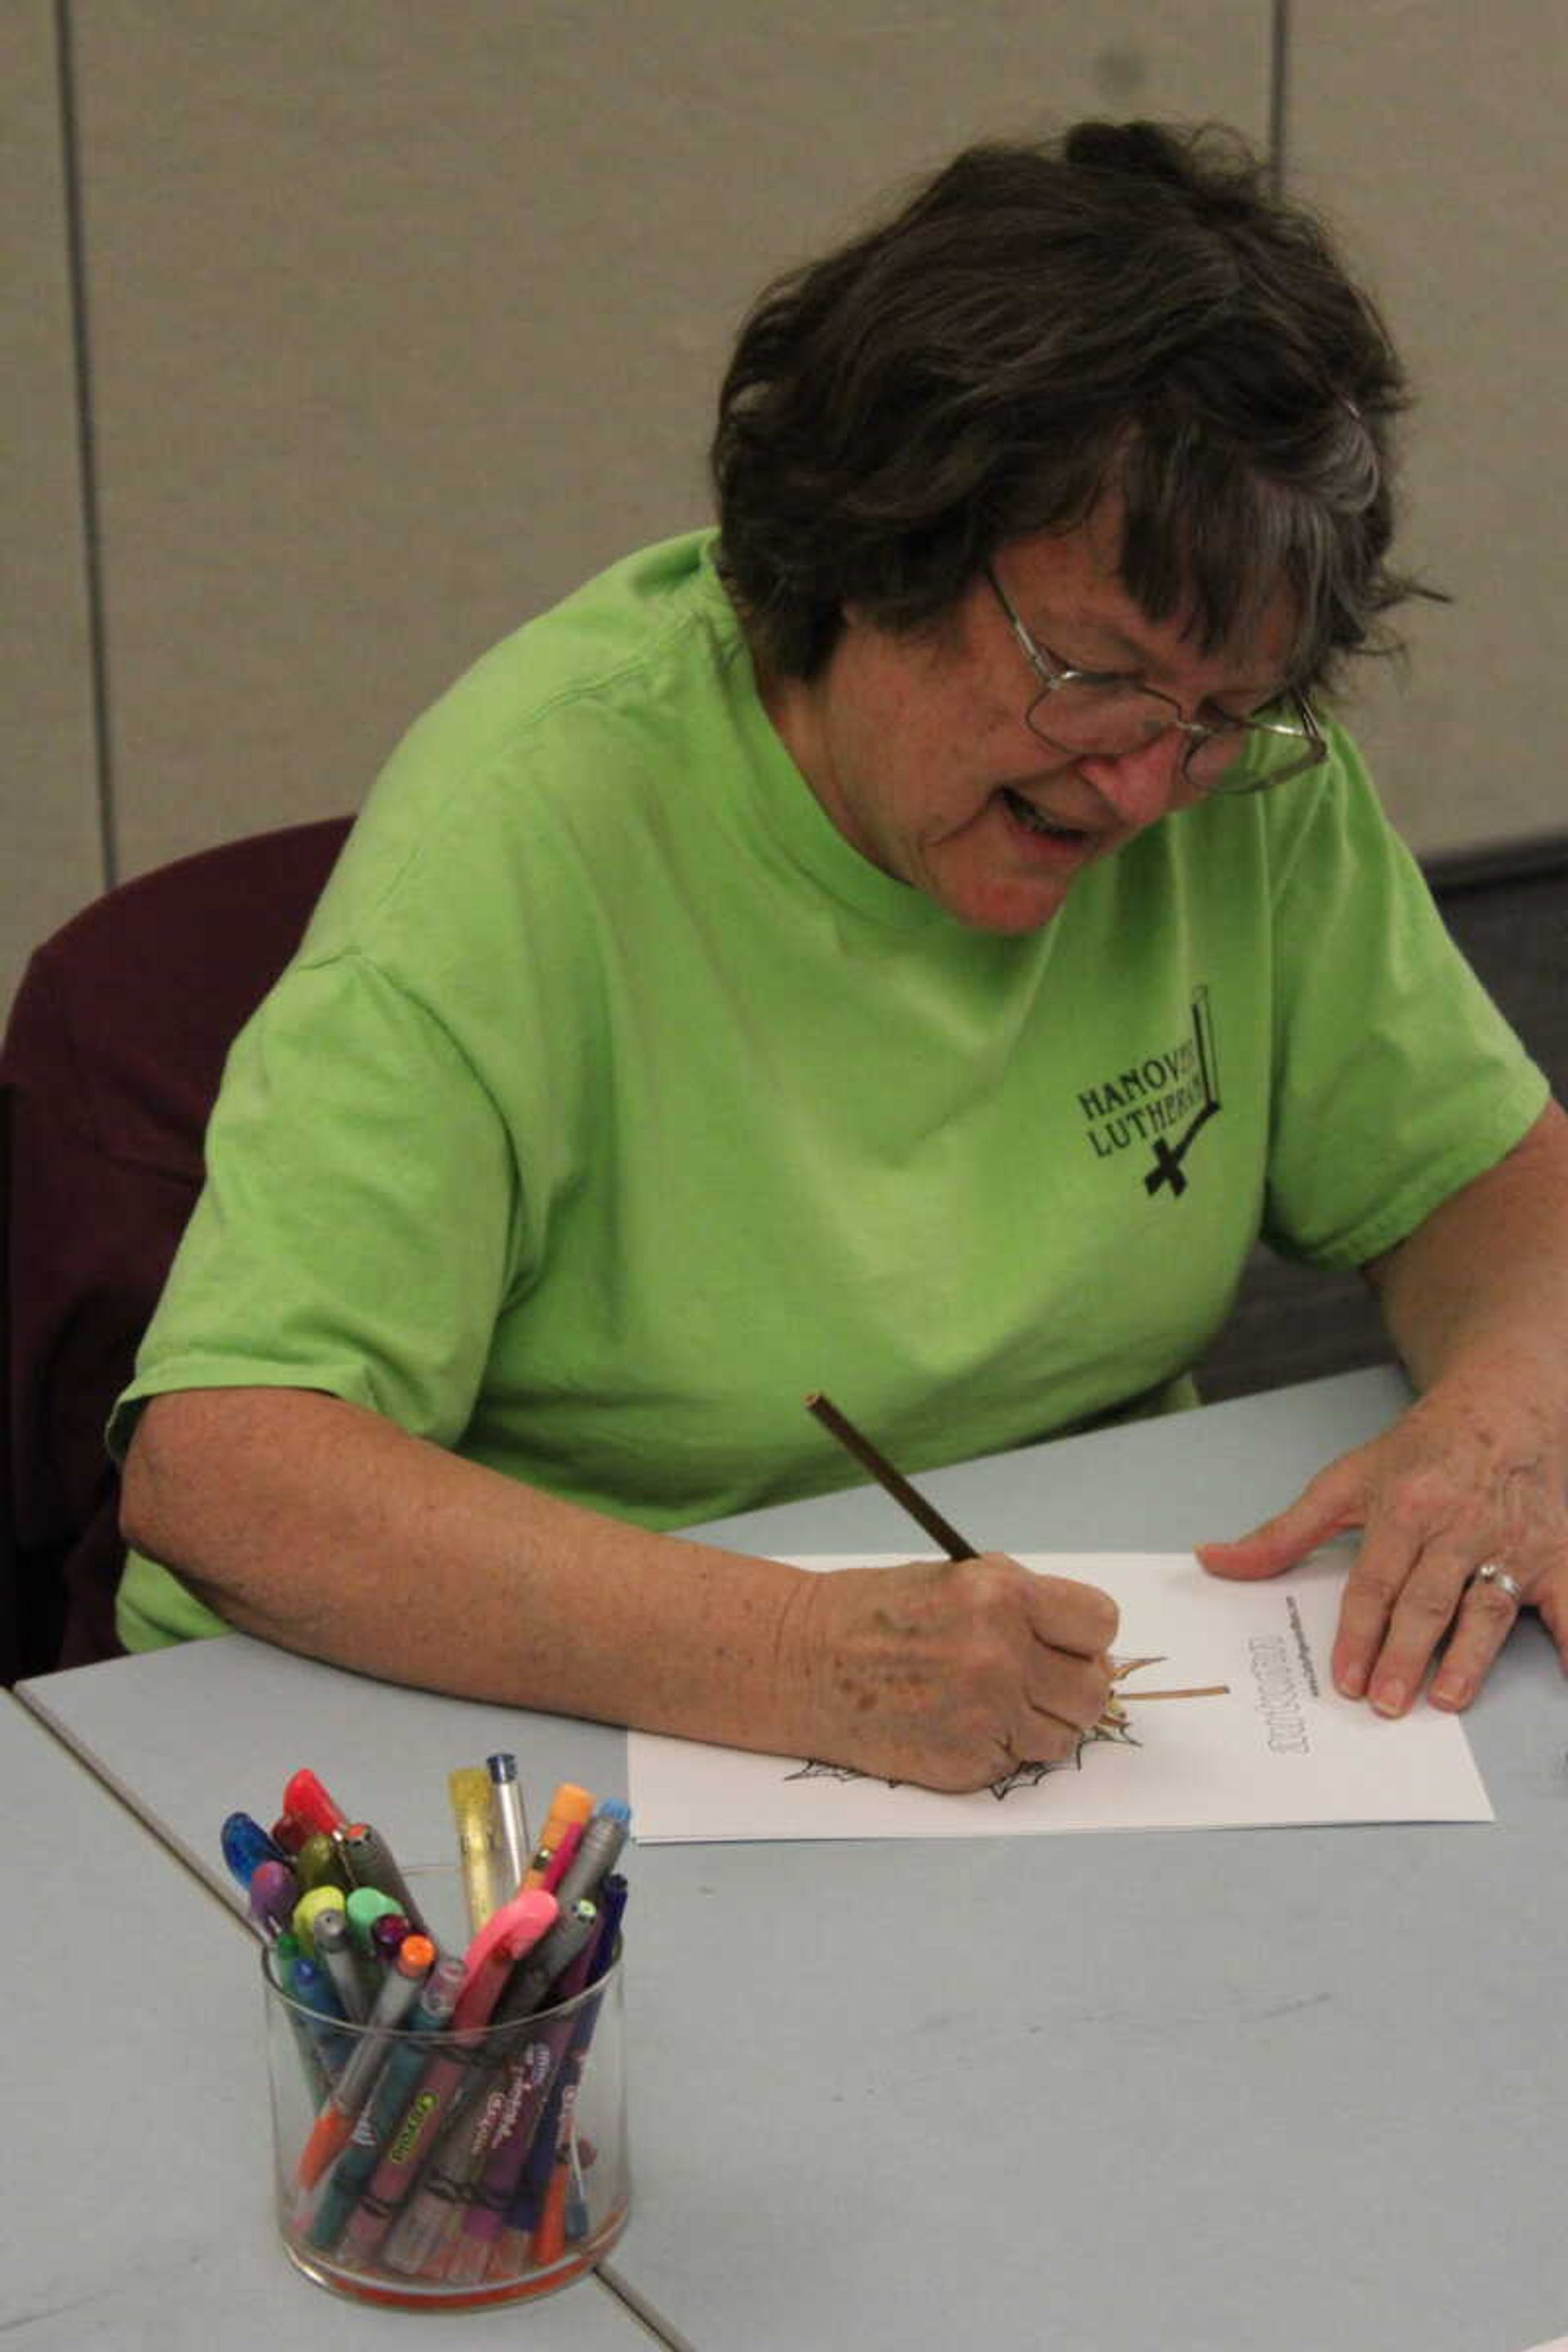 Dotty Behring colors in her design at Cape Girardeau Public Library’s “Coloring for Adults” event on Oct. 24.